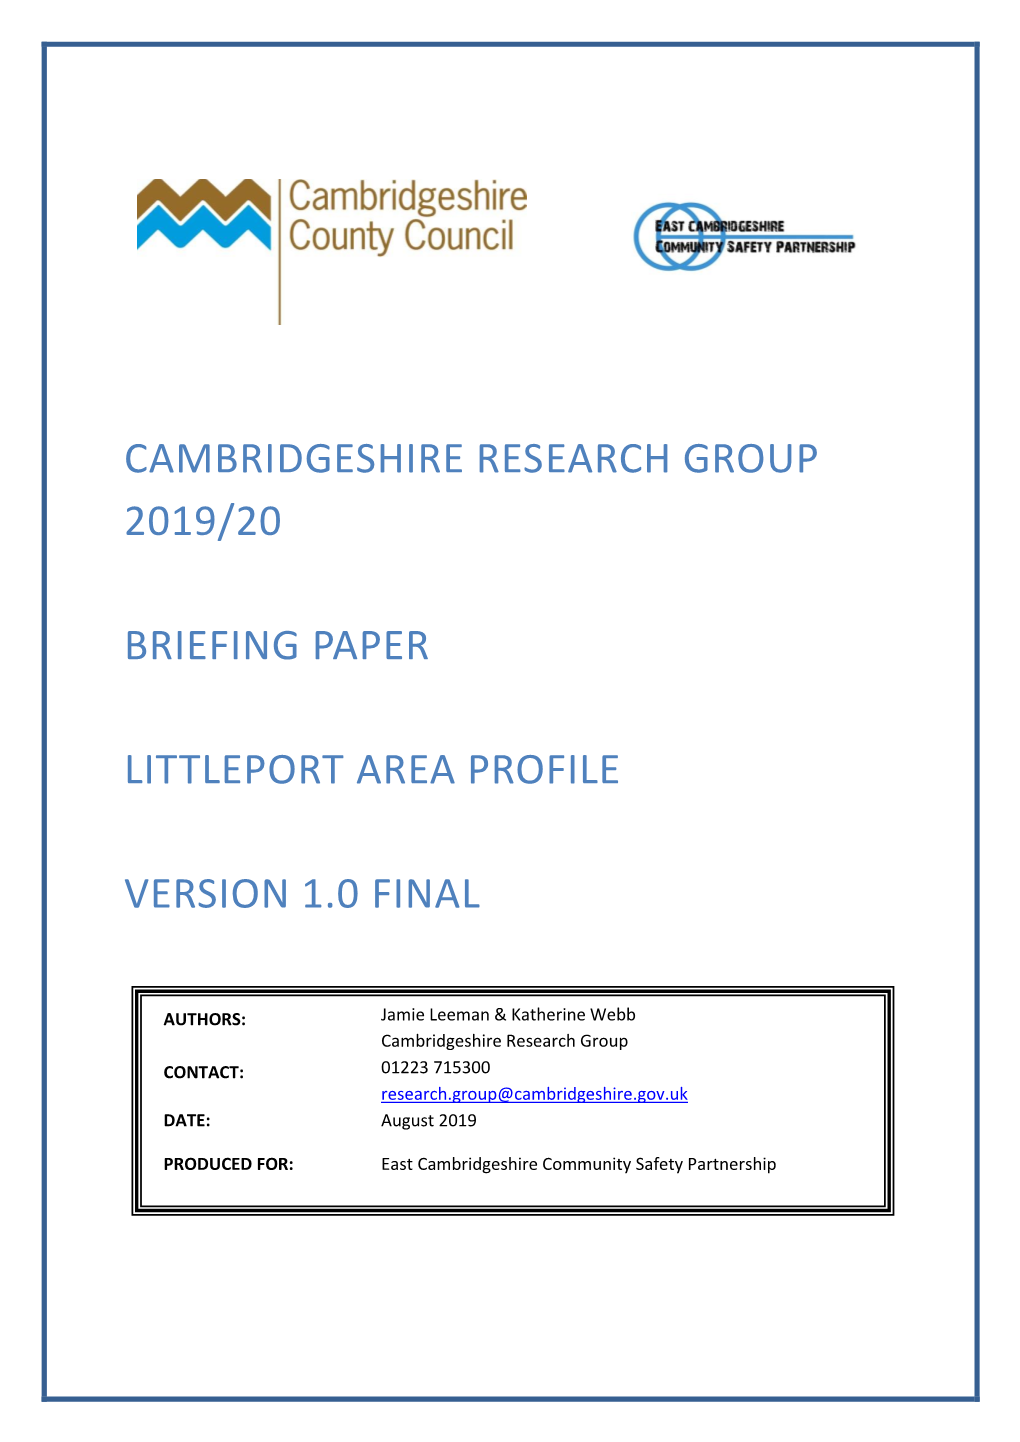 Cambridgeshire Research Group 2019/20 Briefing Paper